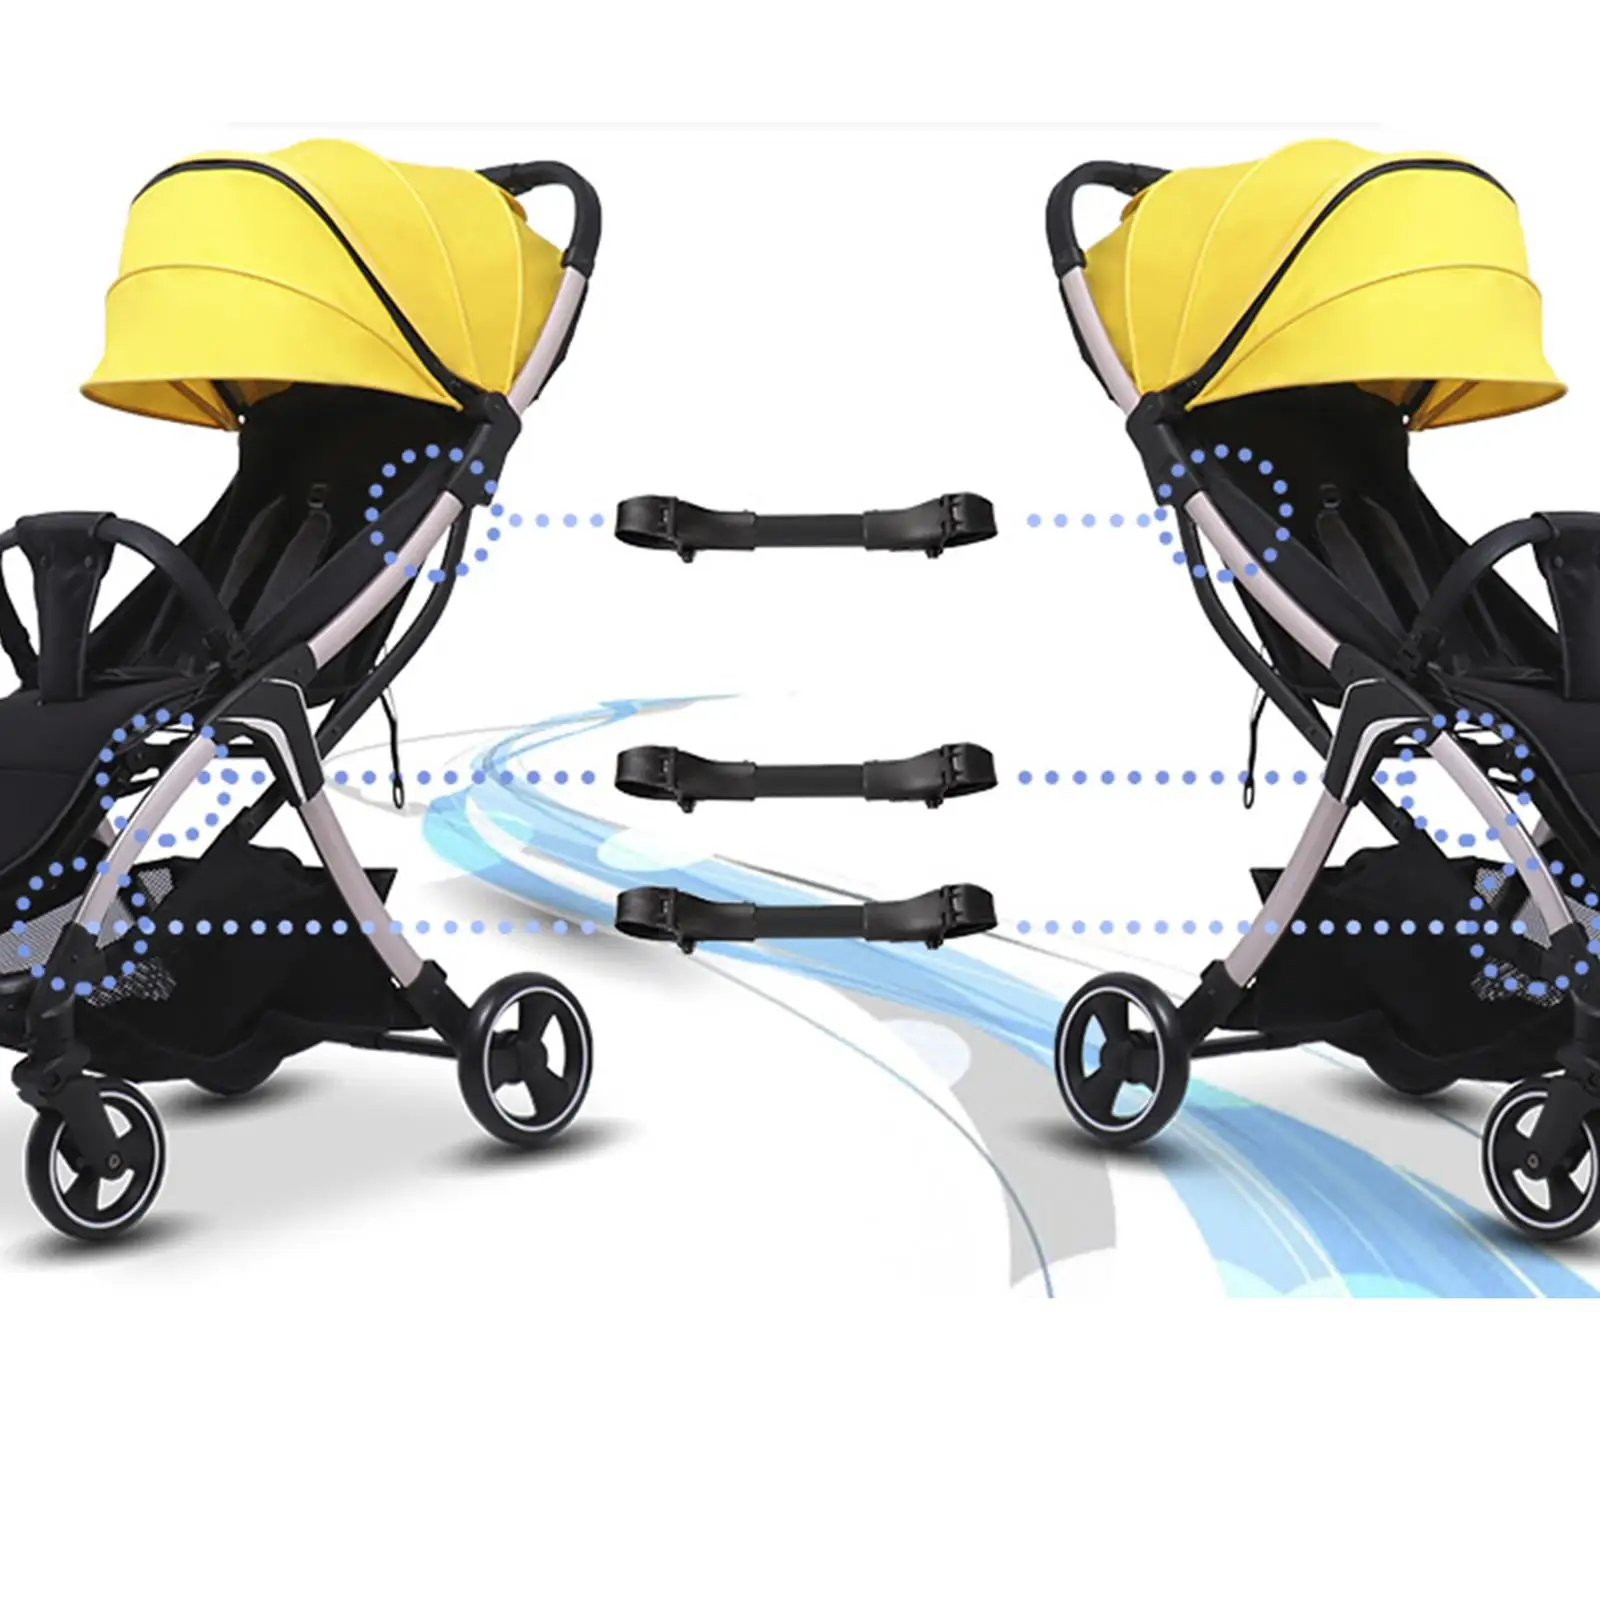 3 Pieces Baby Stroller Connectors - Adjustable Twins Stroller Connectors Parts DIY Accessories - Strong & Sturdy